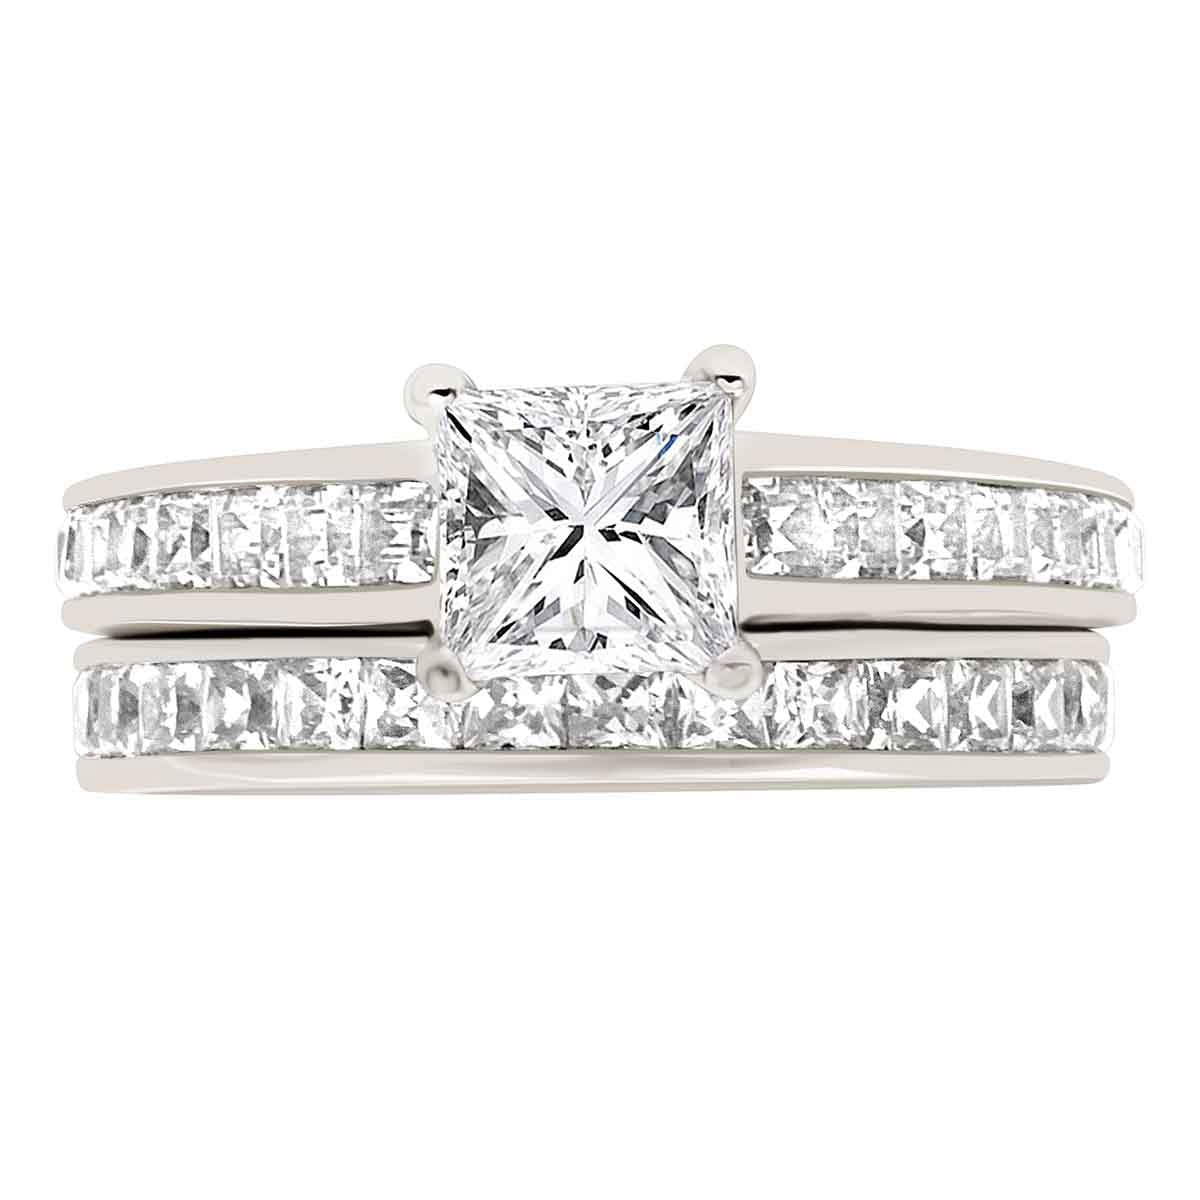 Princess Shape Diamond Ring made from white gold pictured with a diamond set wedding ring